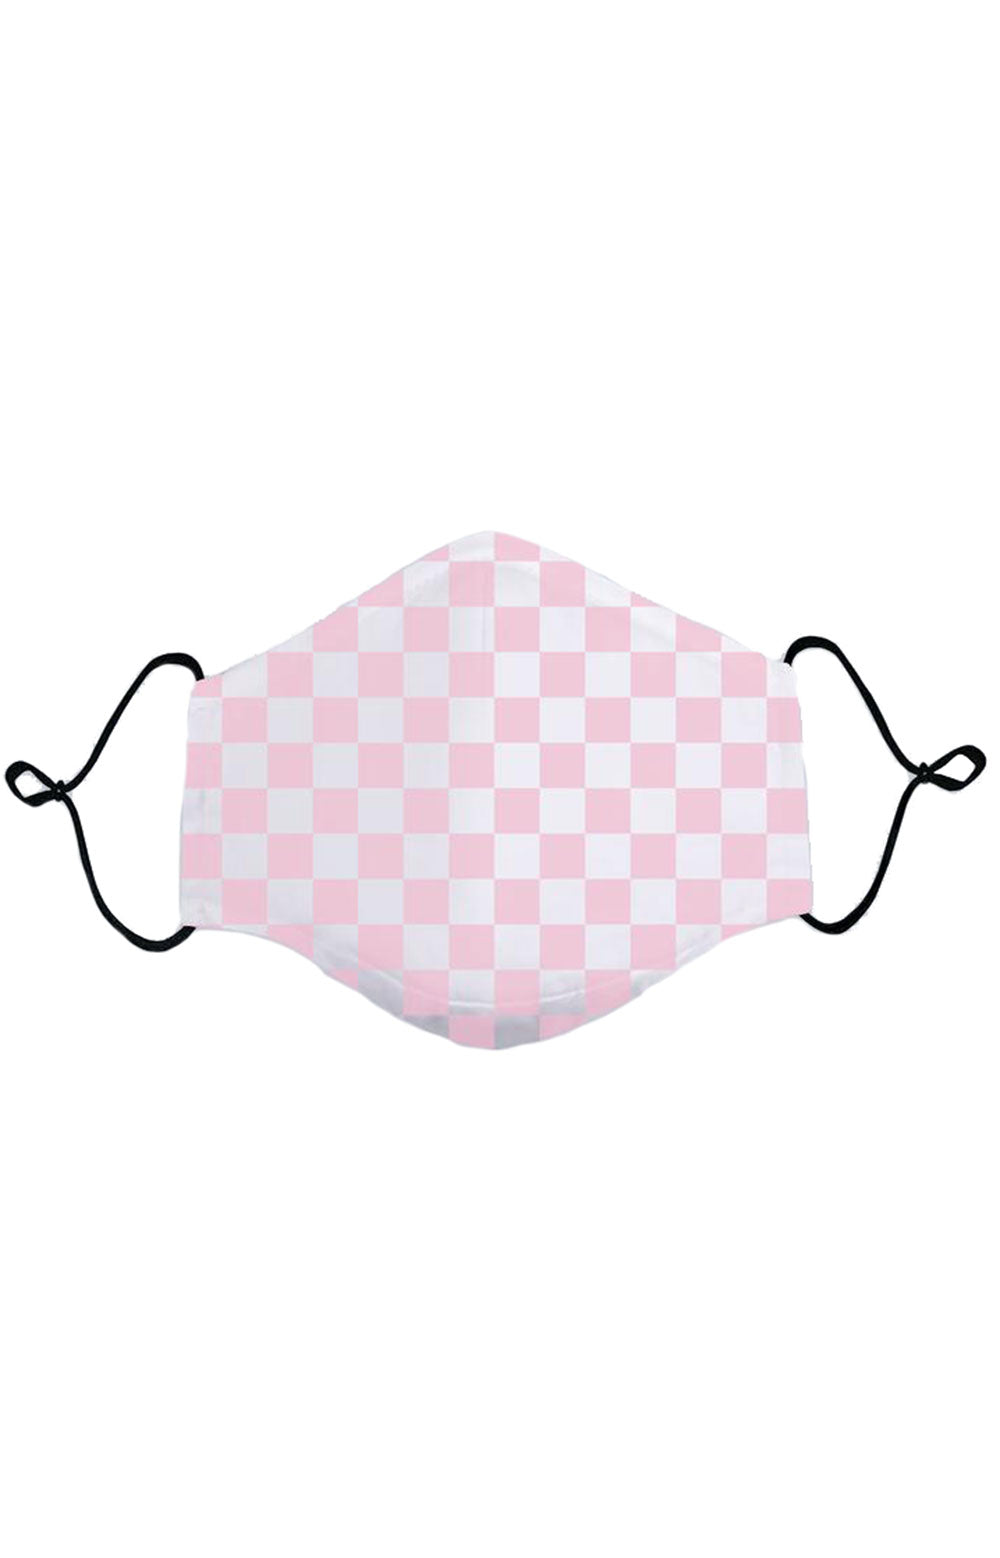 Adult Anti Bacterial Knit Face Mask - Pink Checkerboard